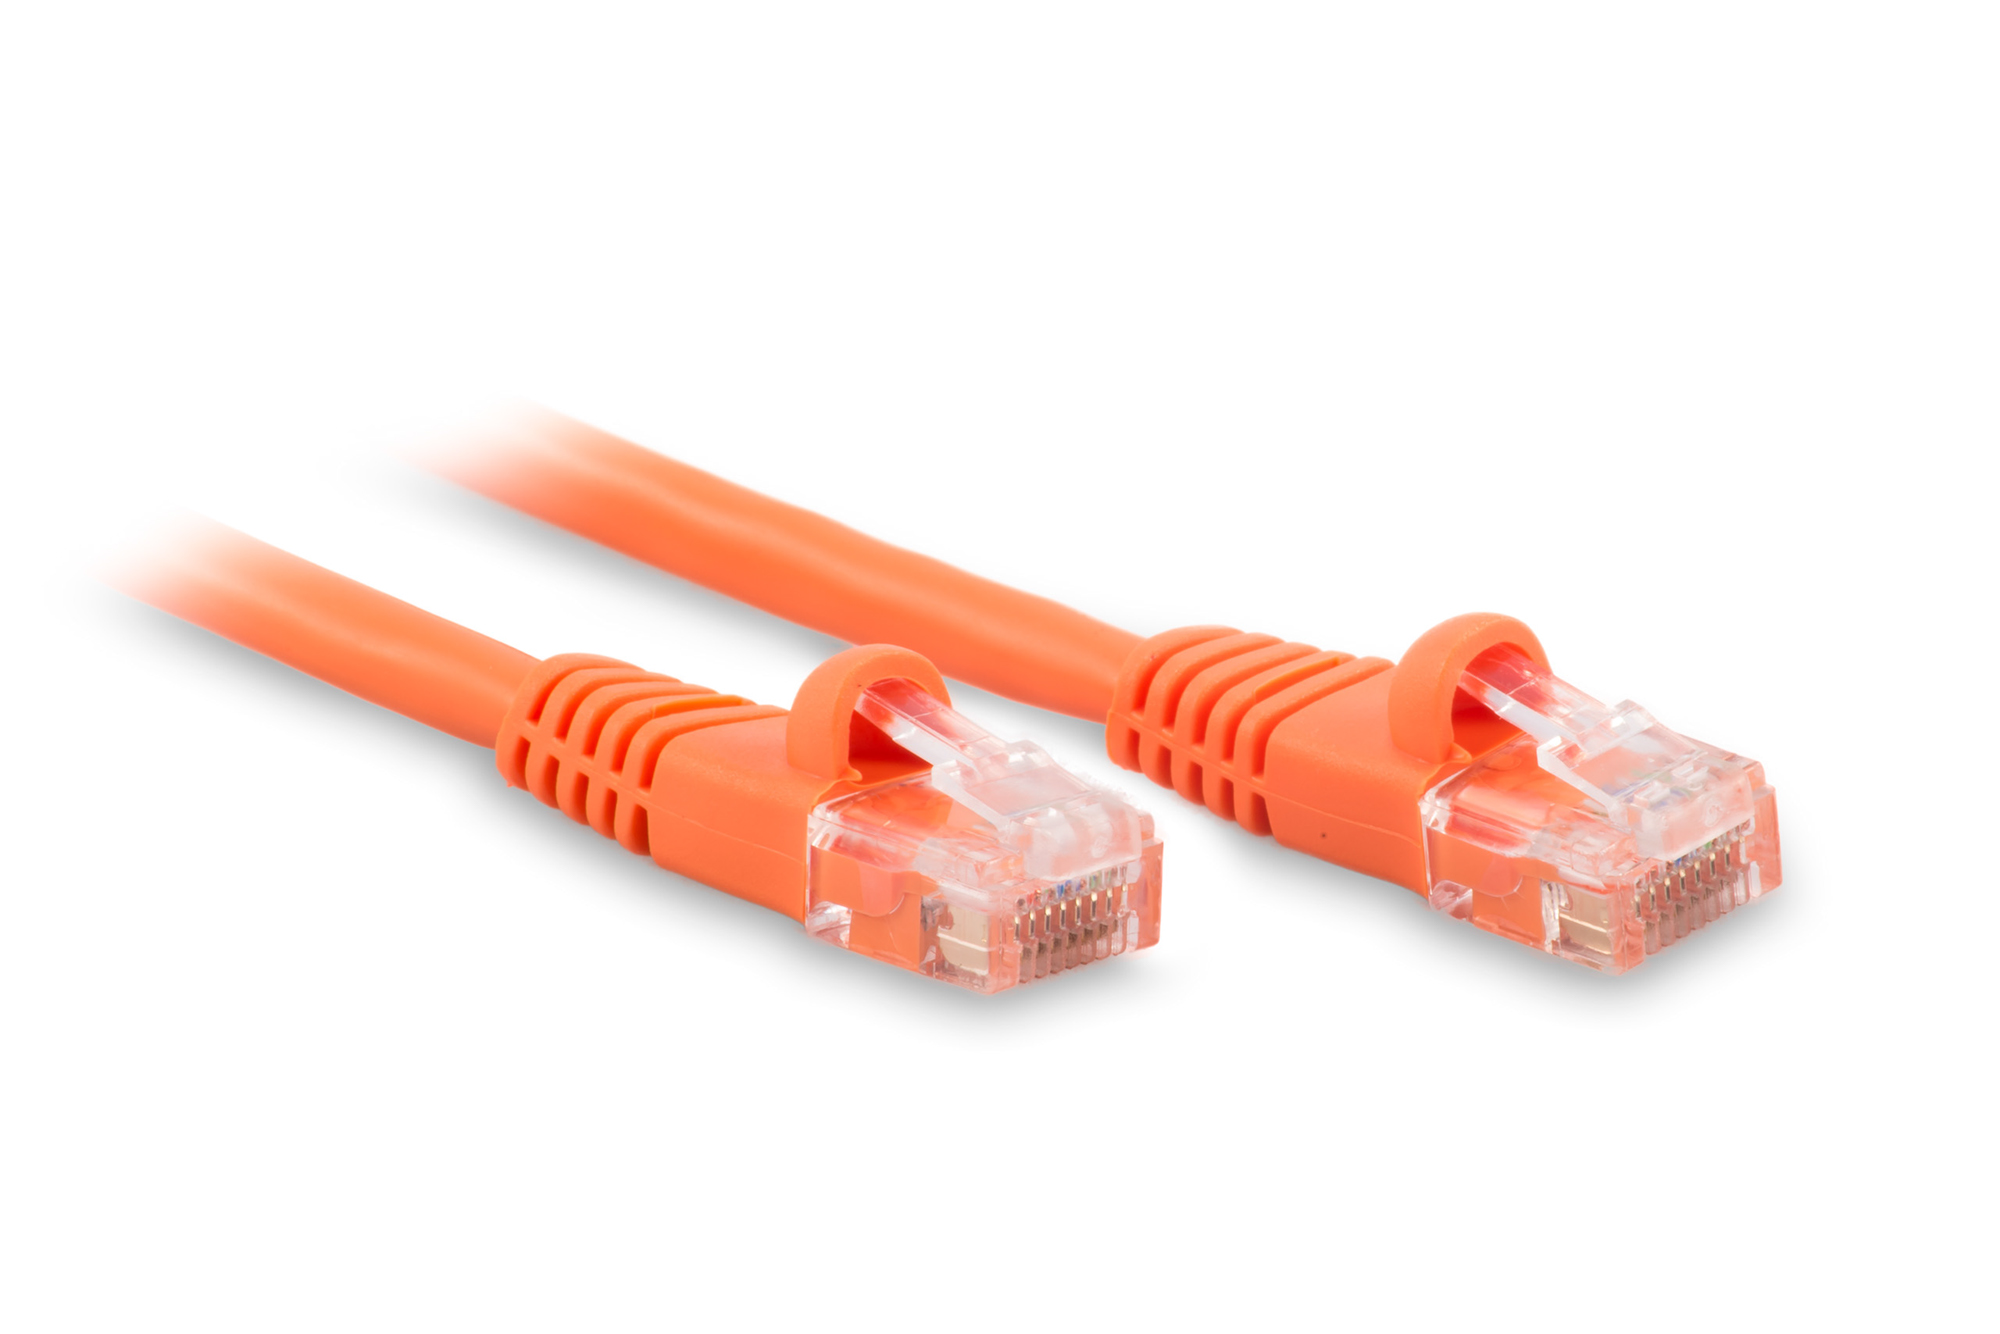 50ft Cat6 Ethernet Patch Cable - Orange Color - Snagless Boot